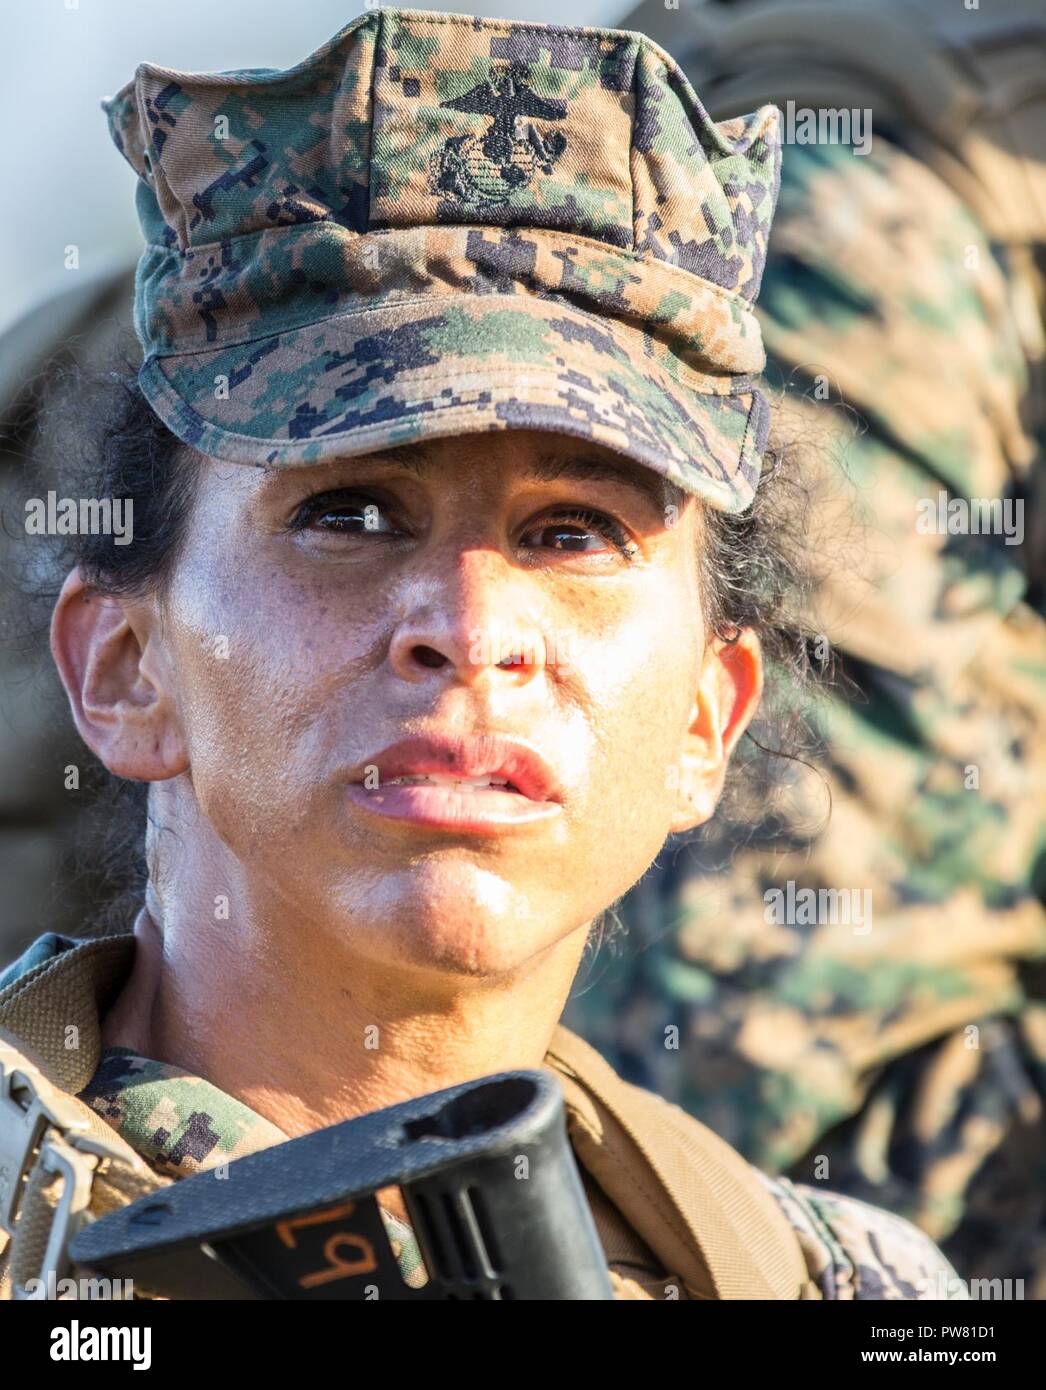 Camp Pendleton (September 29, 2017) Chief Warrant Officer Three Serena M. Tricea an intelligence master analyst with the 11th Marine Expeditionary Unit, participates in a conditioning hike on Camp Pendleton, California. The purpose of the conditioning hike is to target key areas, which are involved with propelling the body forward while also improving cardiovascular fitness, endurance, flexibility, strength and most importantly unit cohesion. Stock Photo